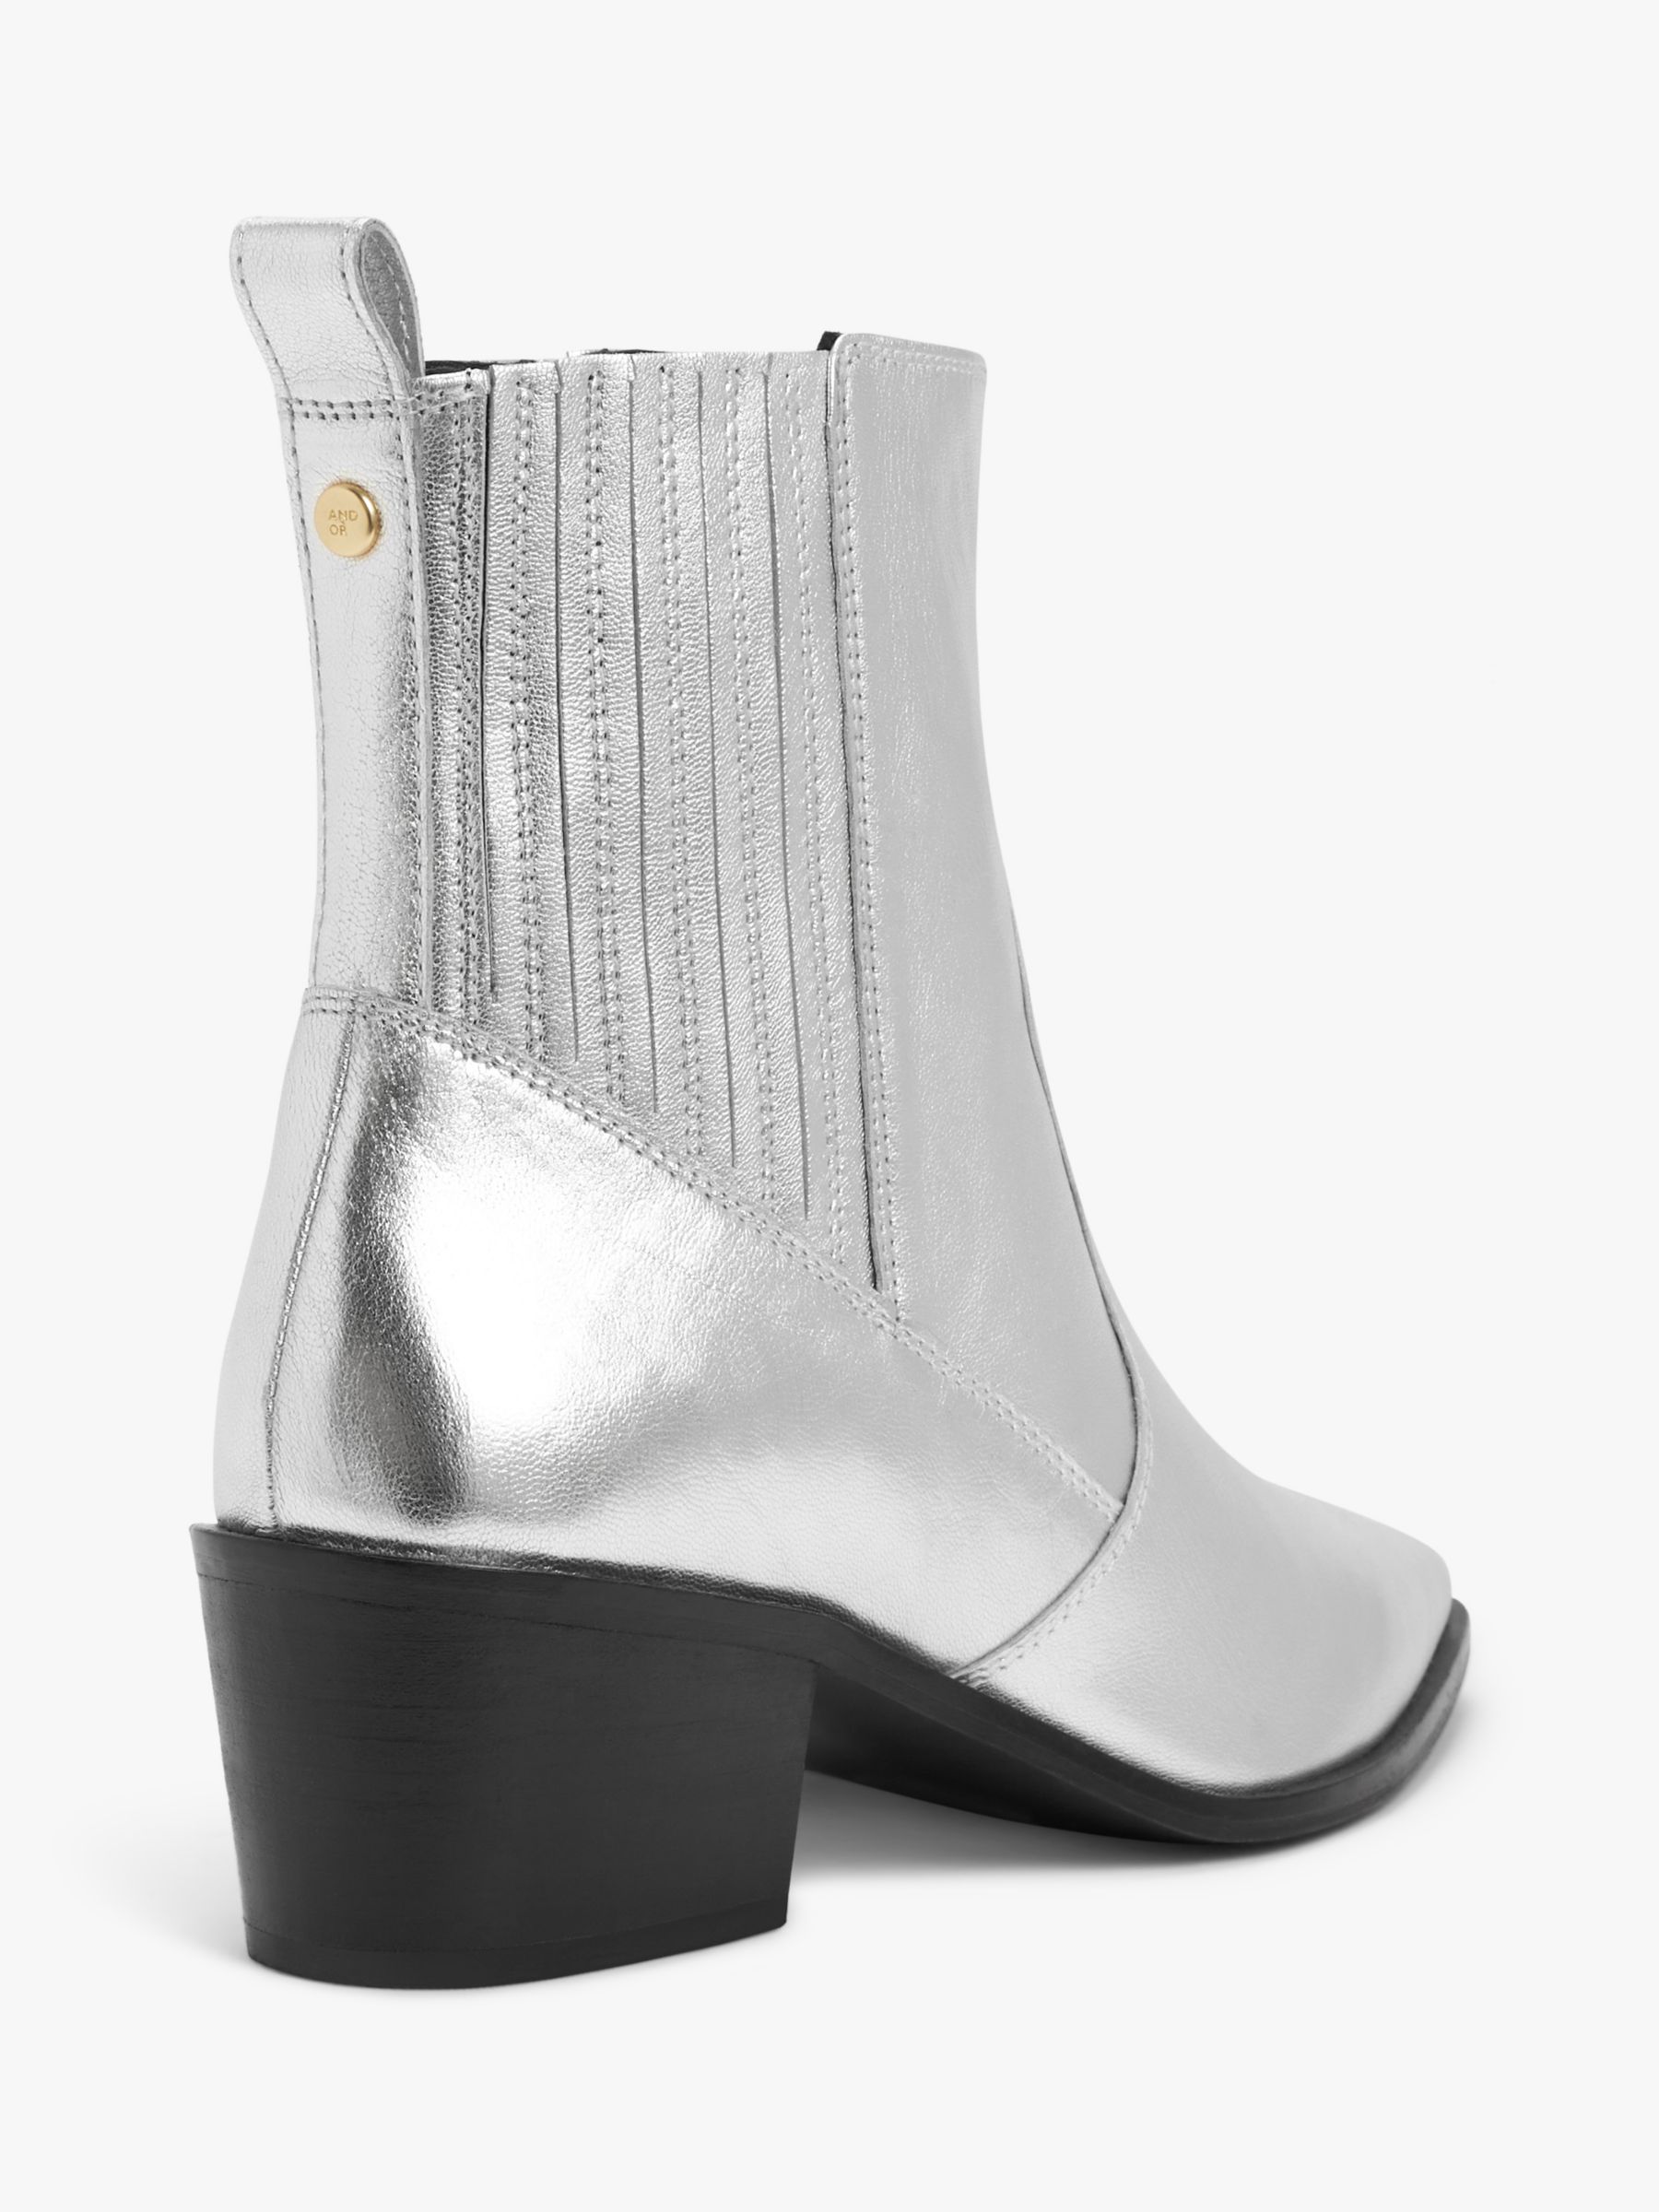 AND/OR Pixie Leather Heeled Chelsea Western Boots, Silver, 6